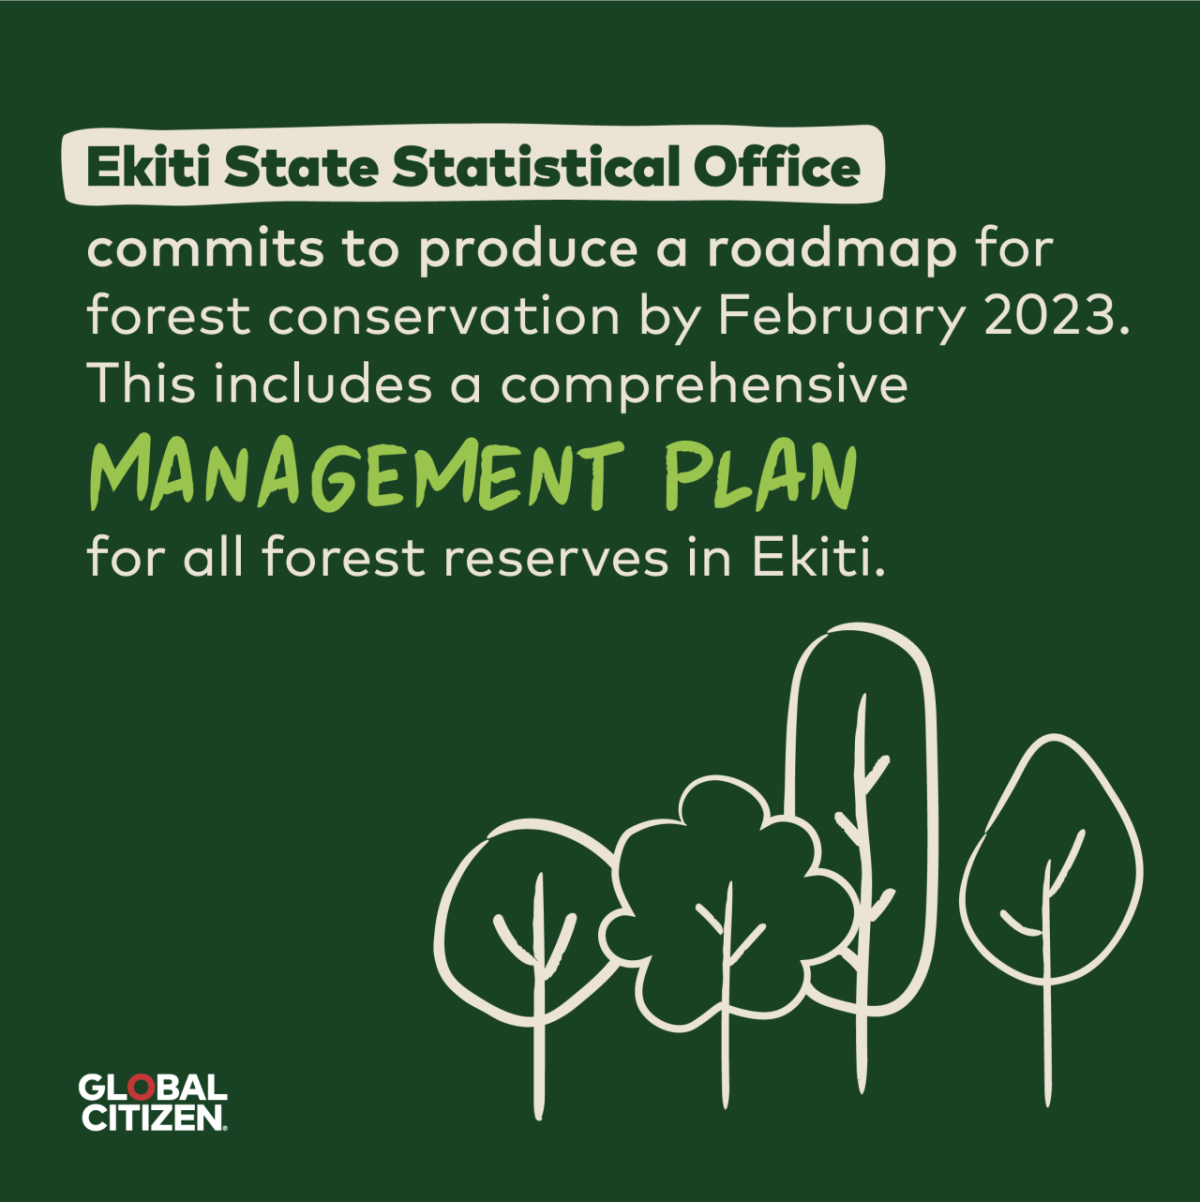 Ekiti State Statistical Office commits to produce a roadmap for forest conservation by February 2023, including a comprehensive management plan for all forest reserves in Ekiti 